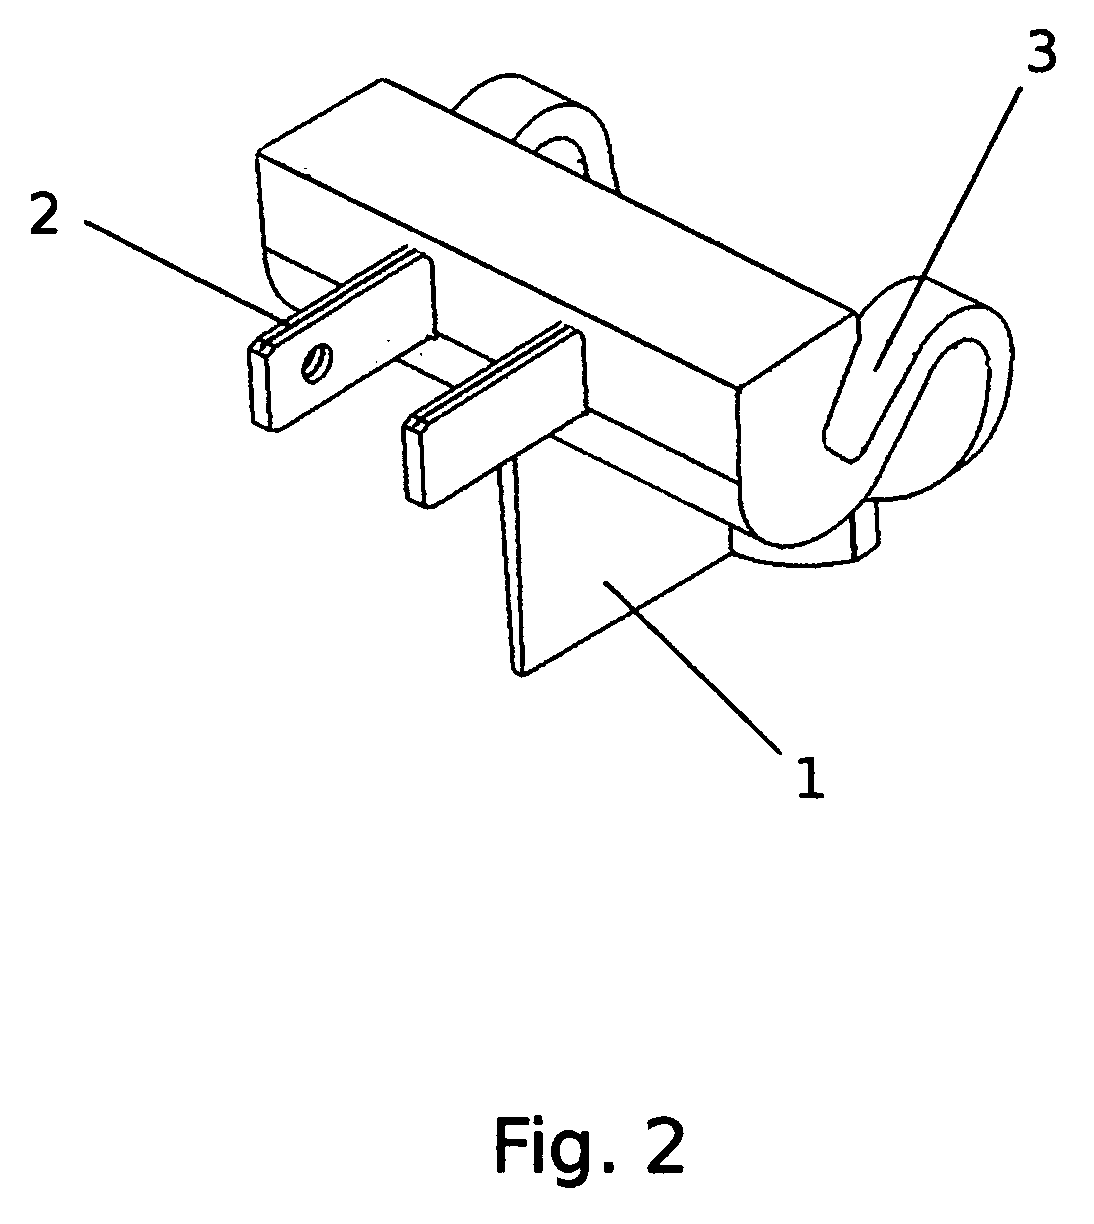 Heat apparatus for extending the life of blade cutting edges